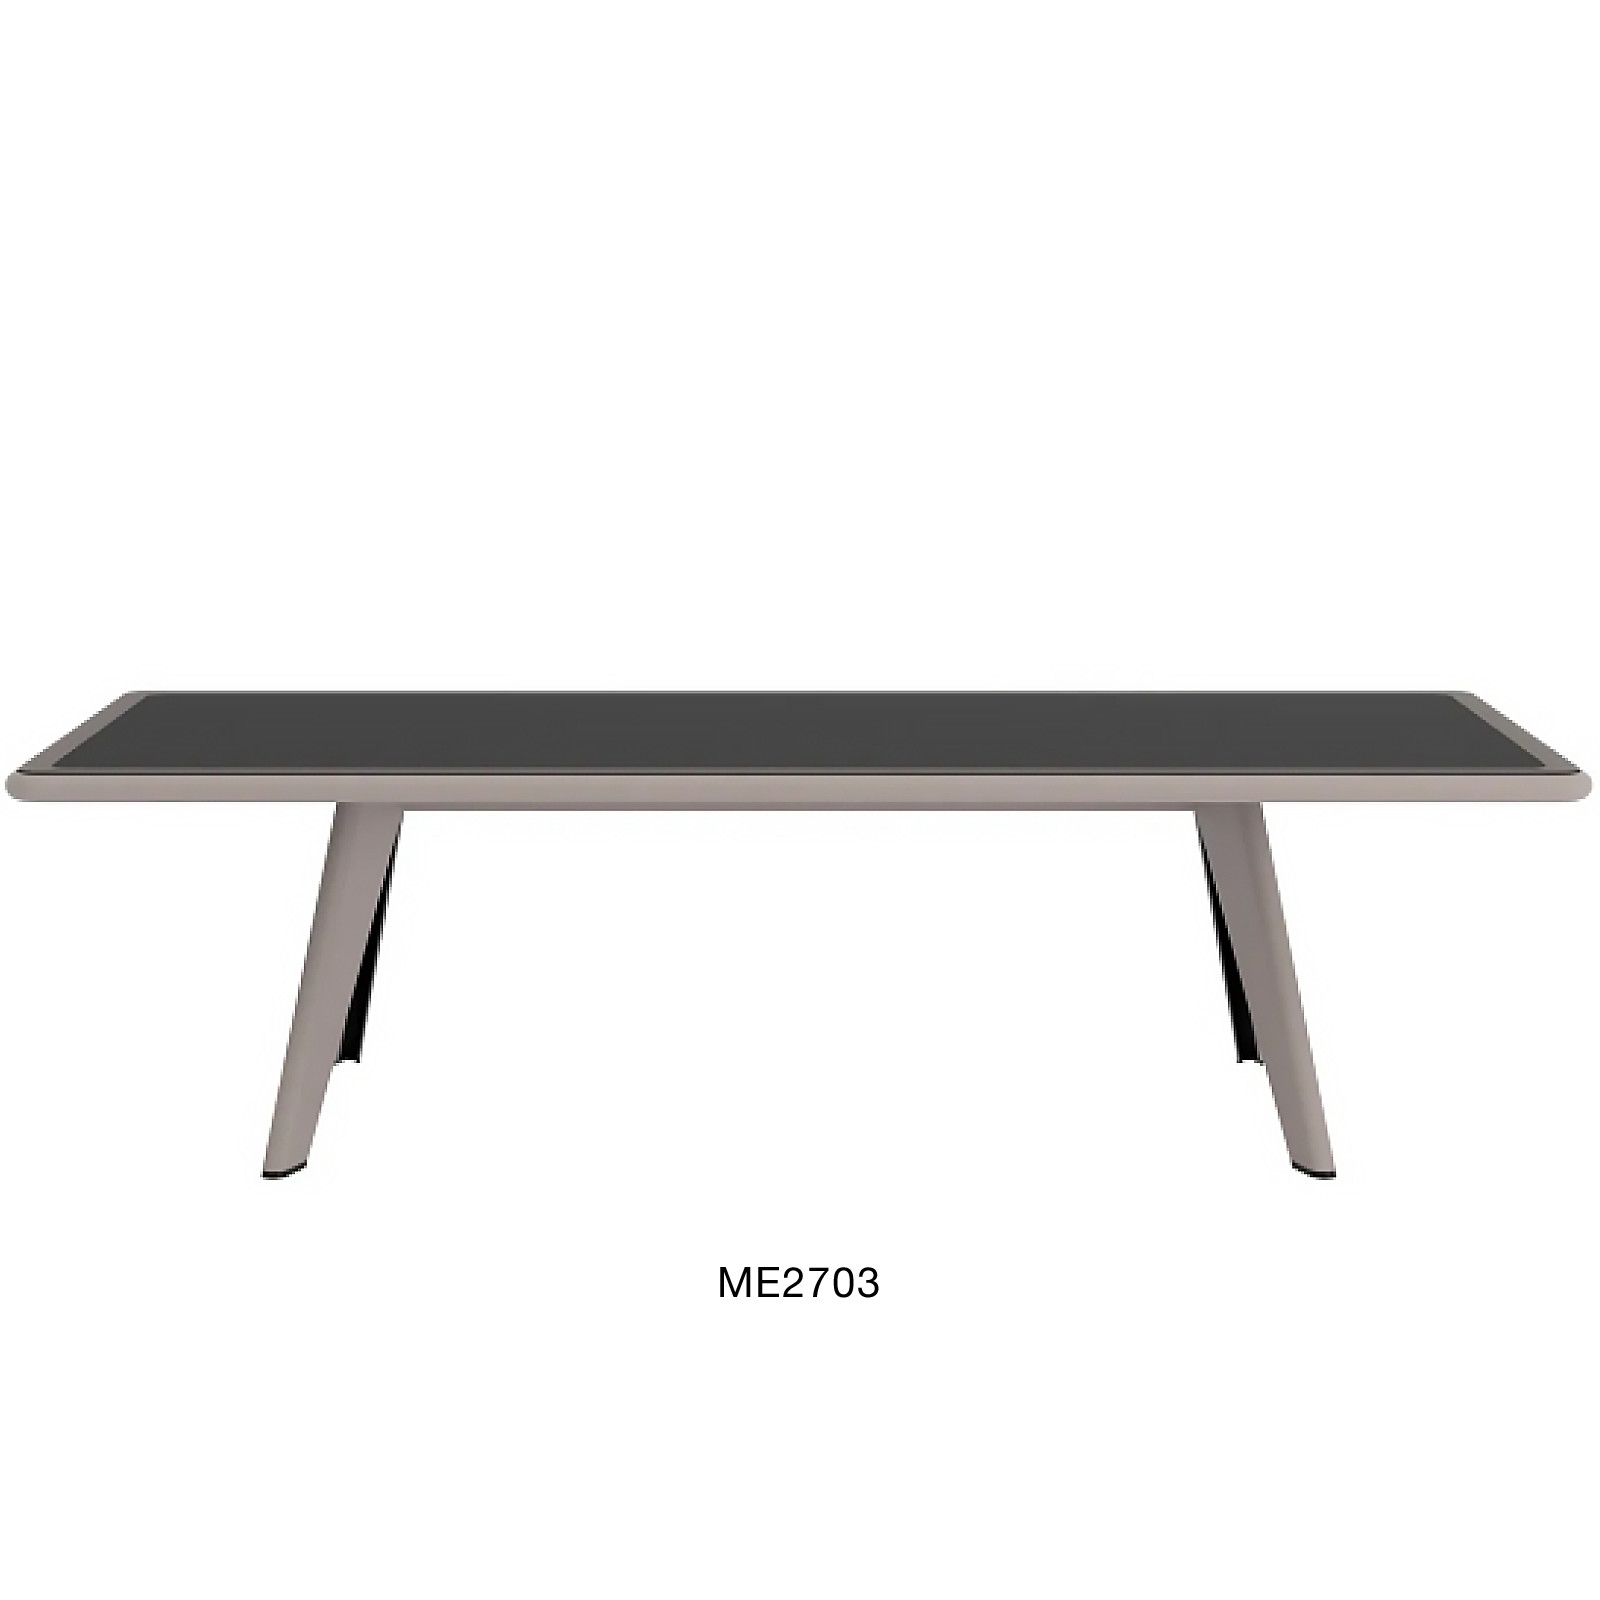 PLANAR CONFERENCE TABLE